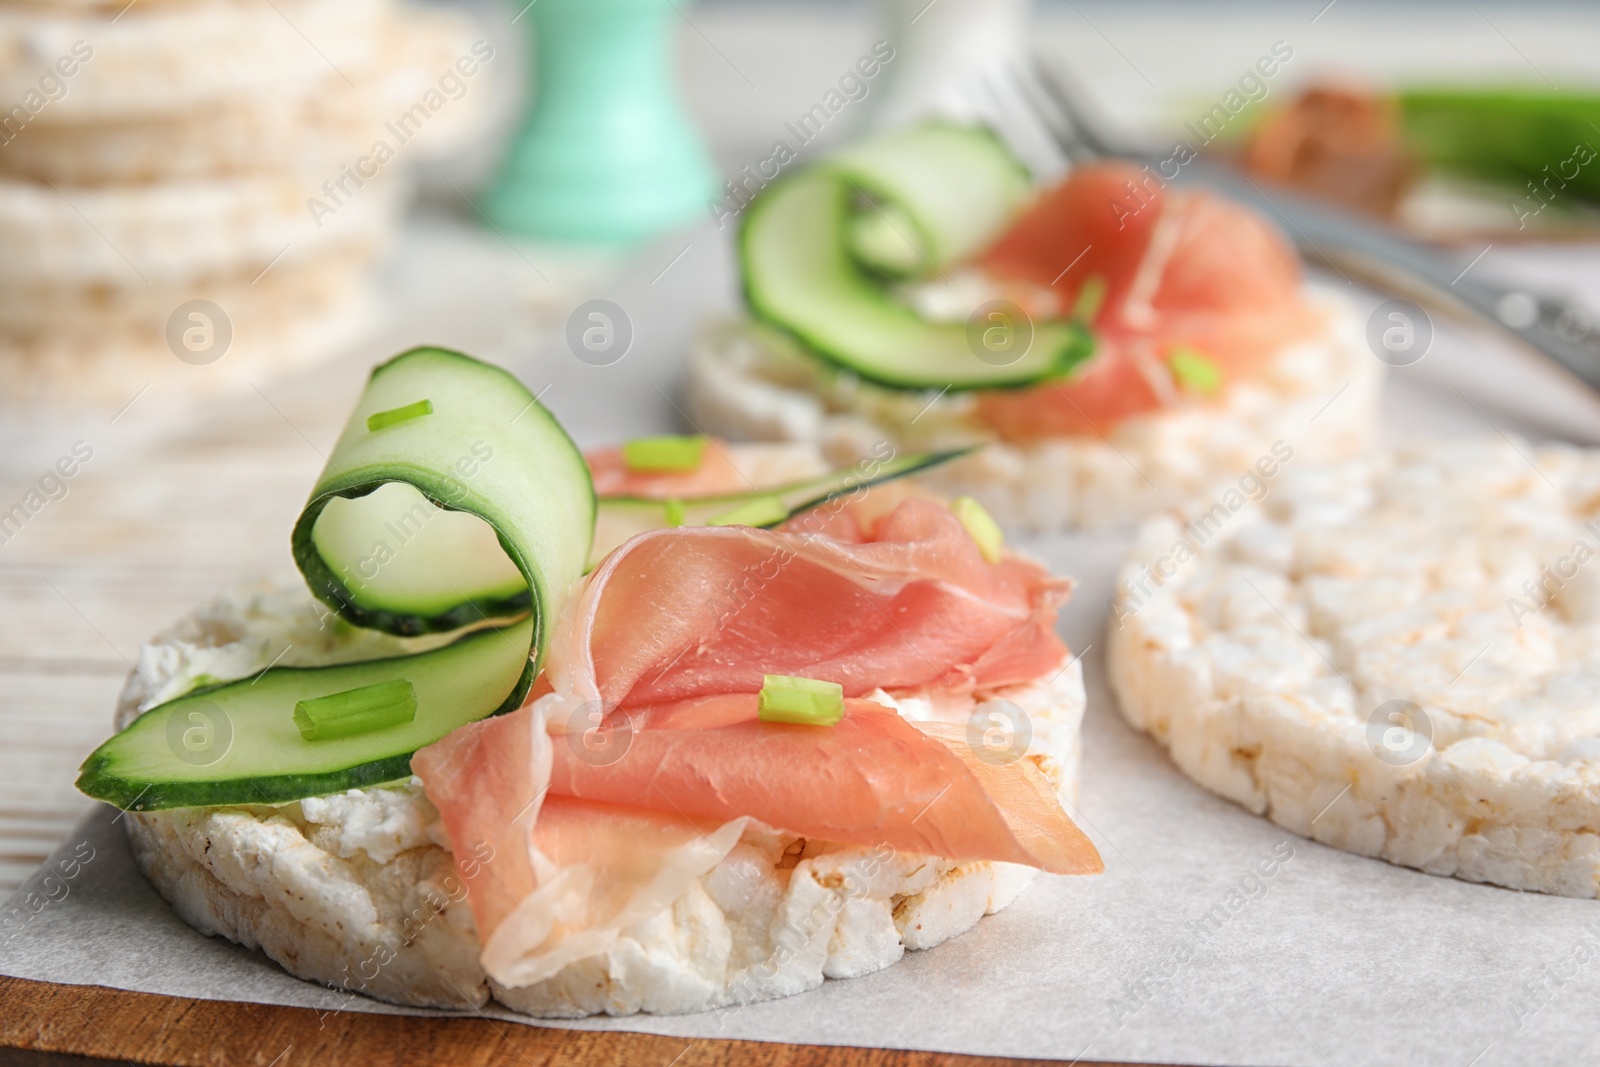 Photo of Puffed rice cakes with prosciutto and cucumber on wooden board, closeup